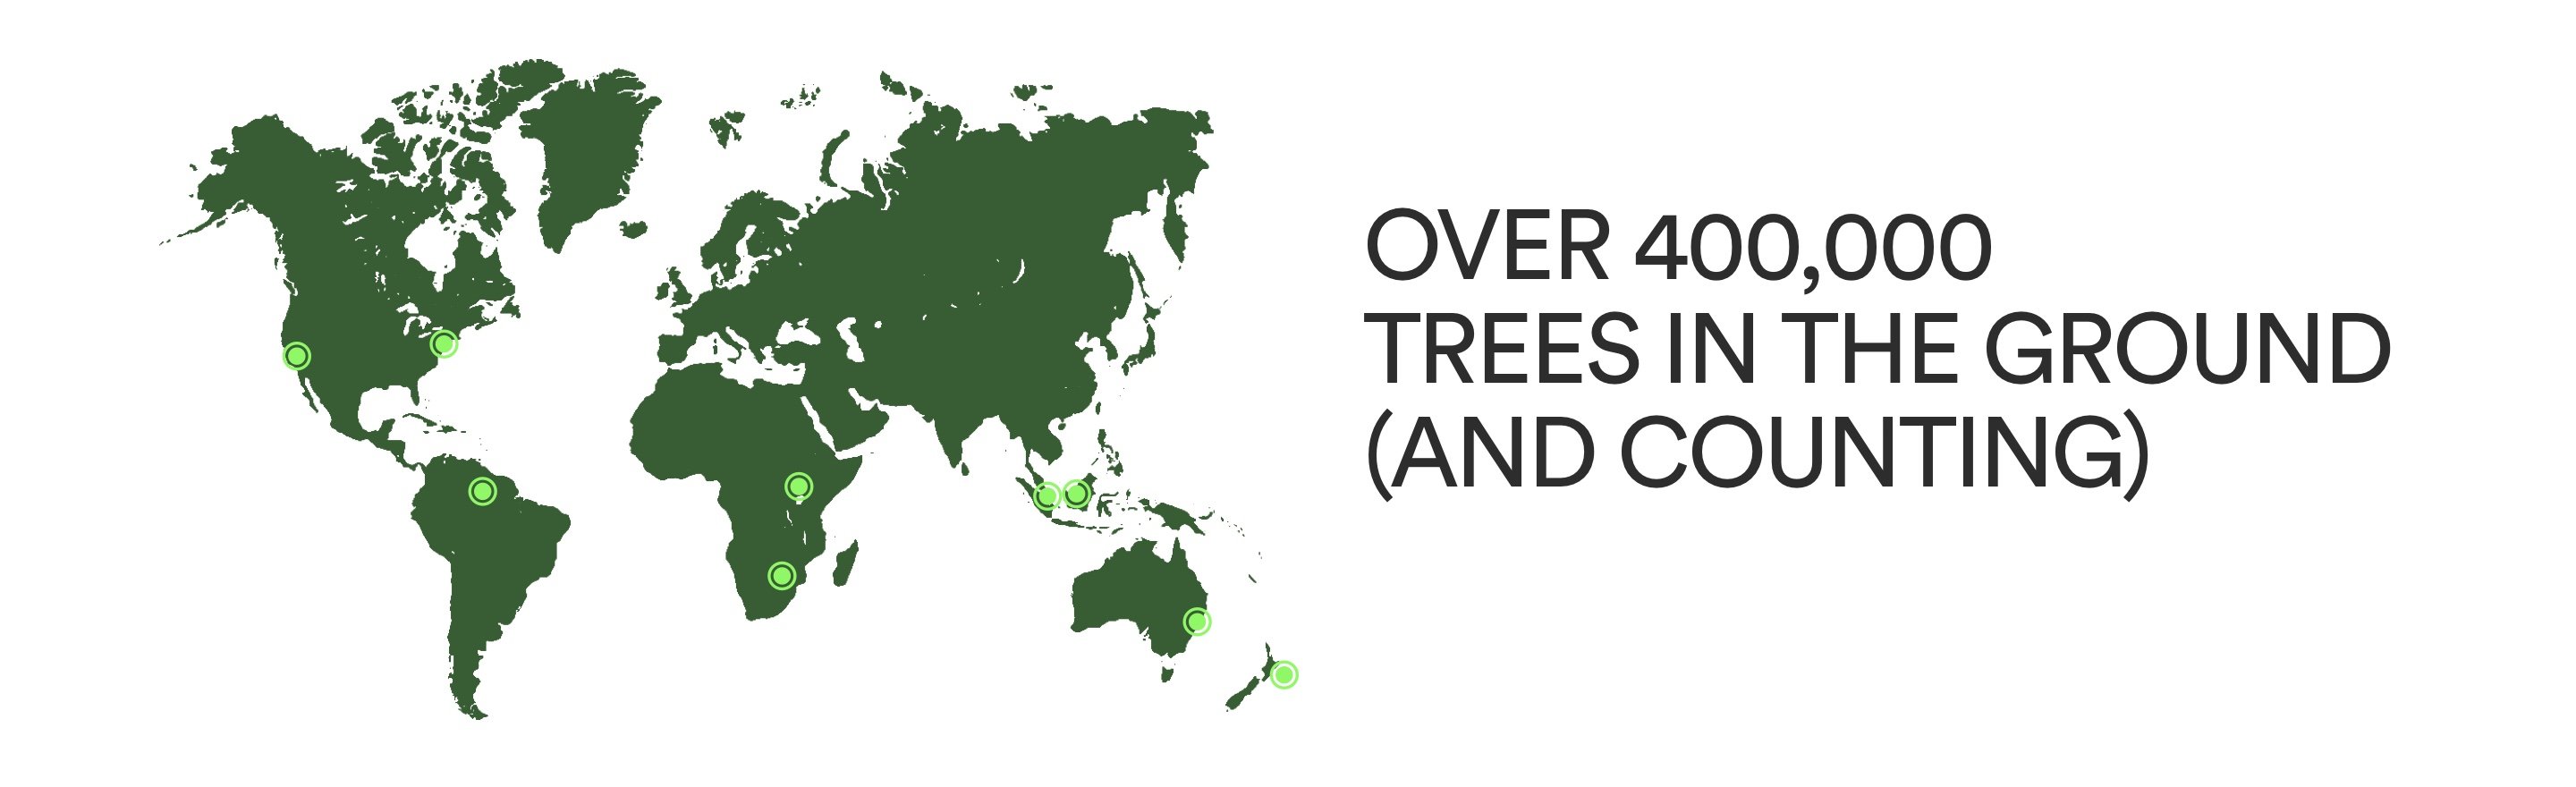 Over 400,000 Trees in the ground (and counting) 